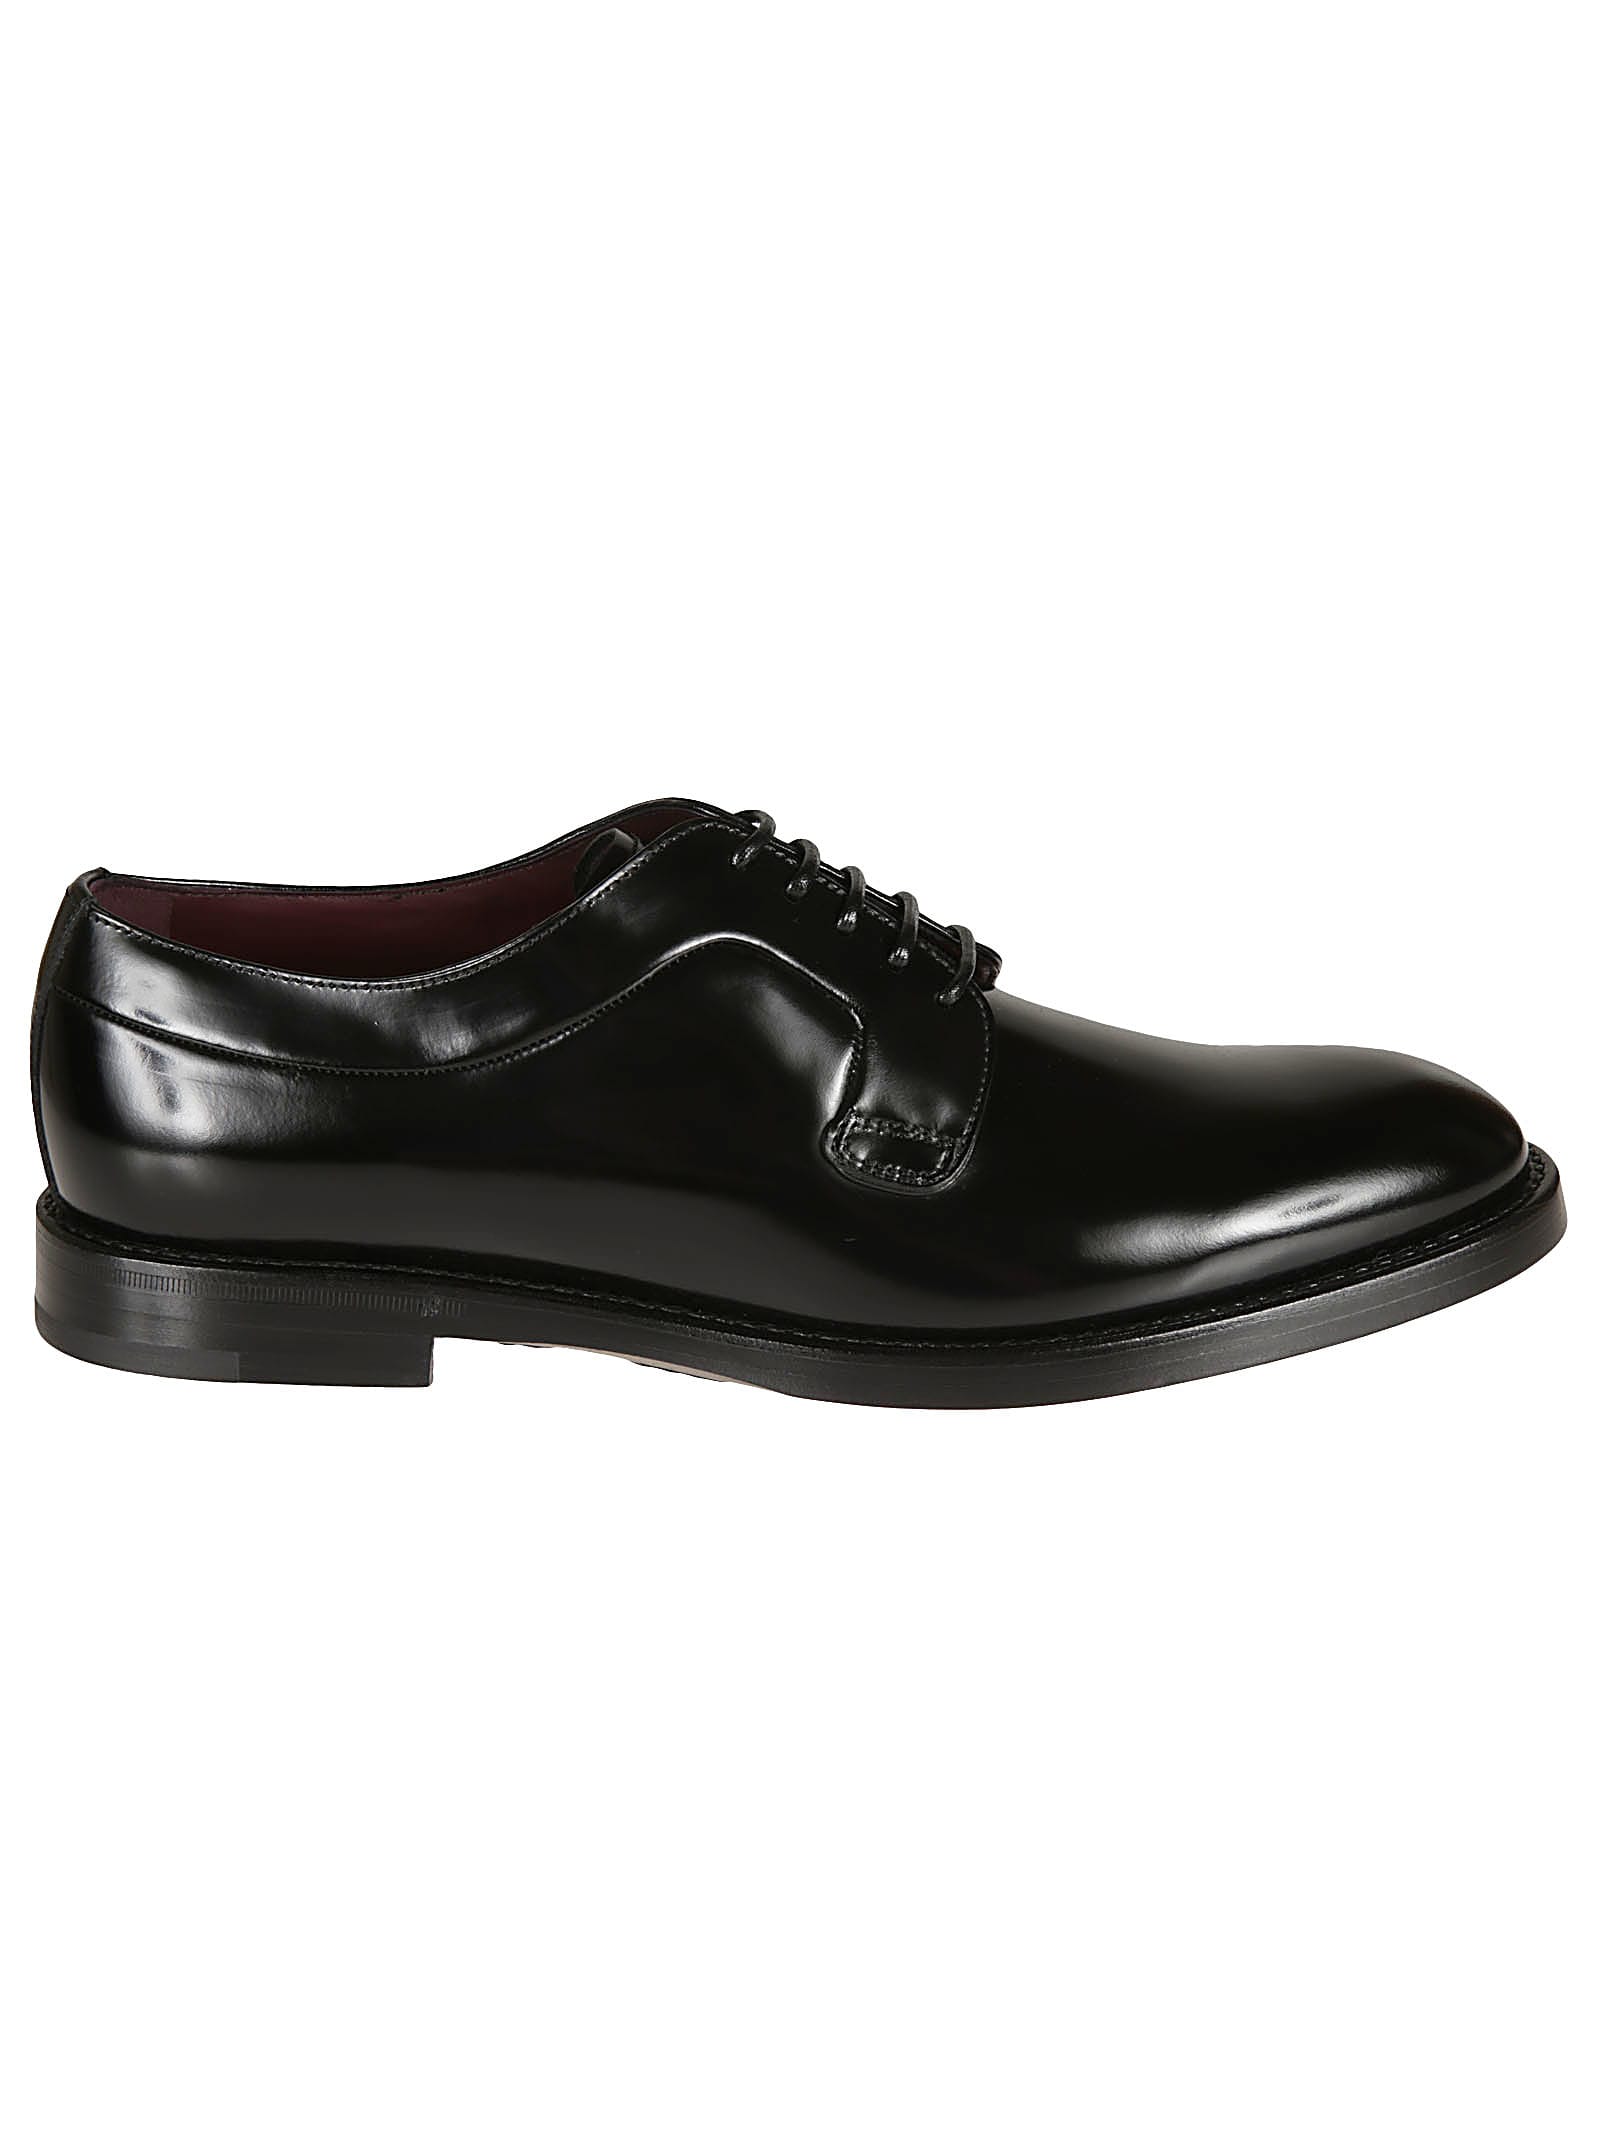 Dolce & Gabbana CLASSIC OXFORD SHOES